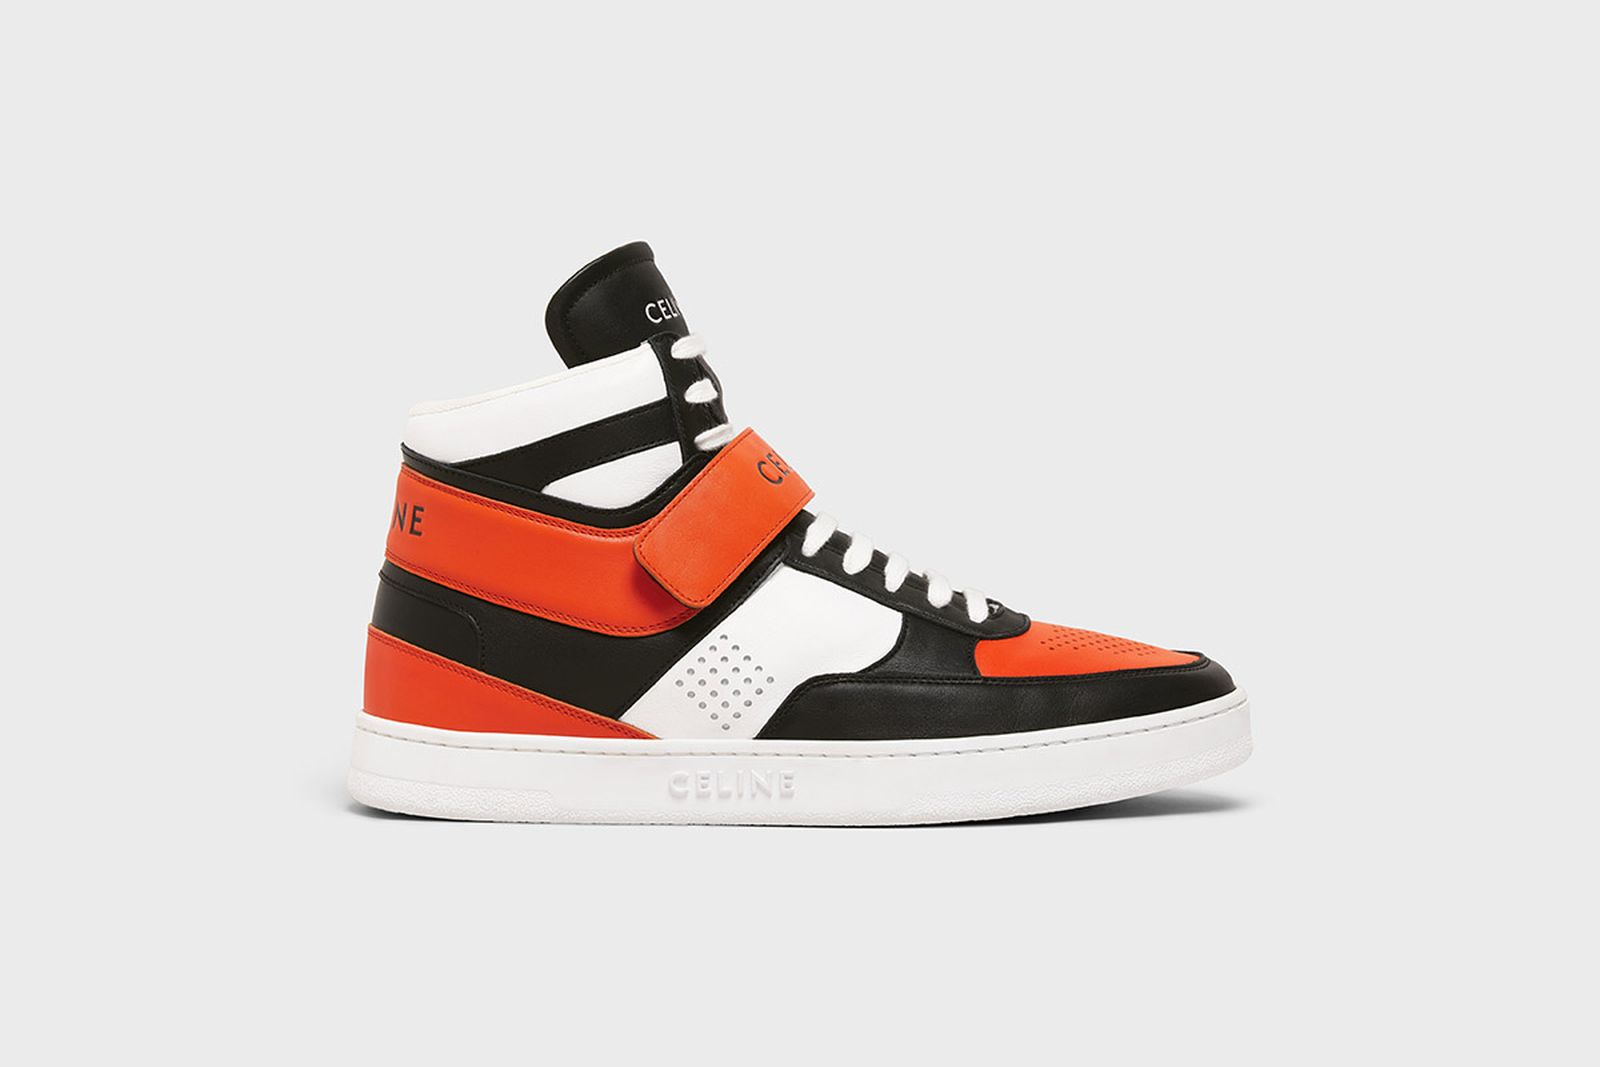 CELINE Releases Its New CT-03 Basketball Sneaker